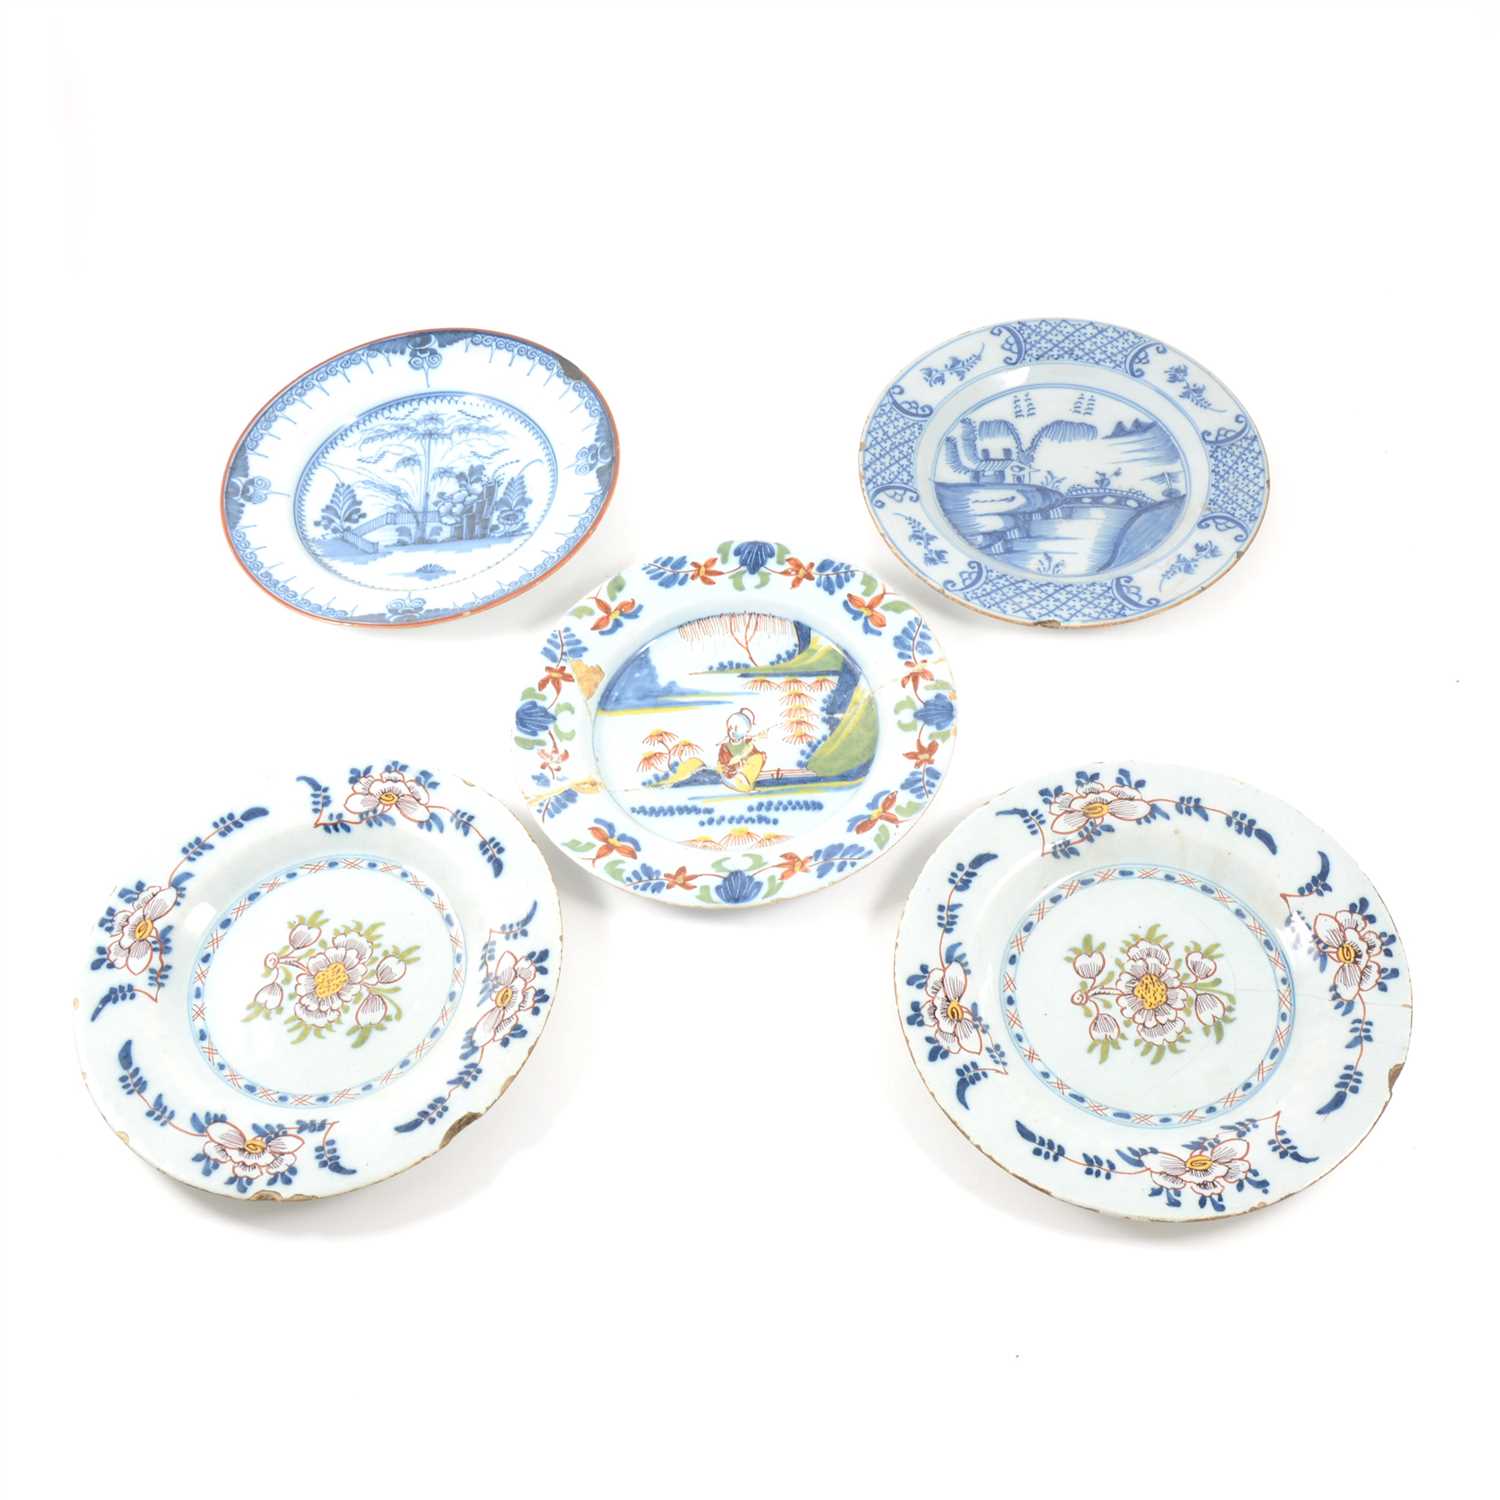 Lot 57 - Near pair of Dutch Delft plates, 18th Century, and three other Delft plates